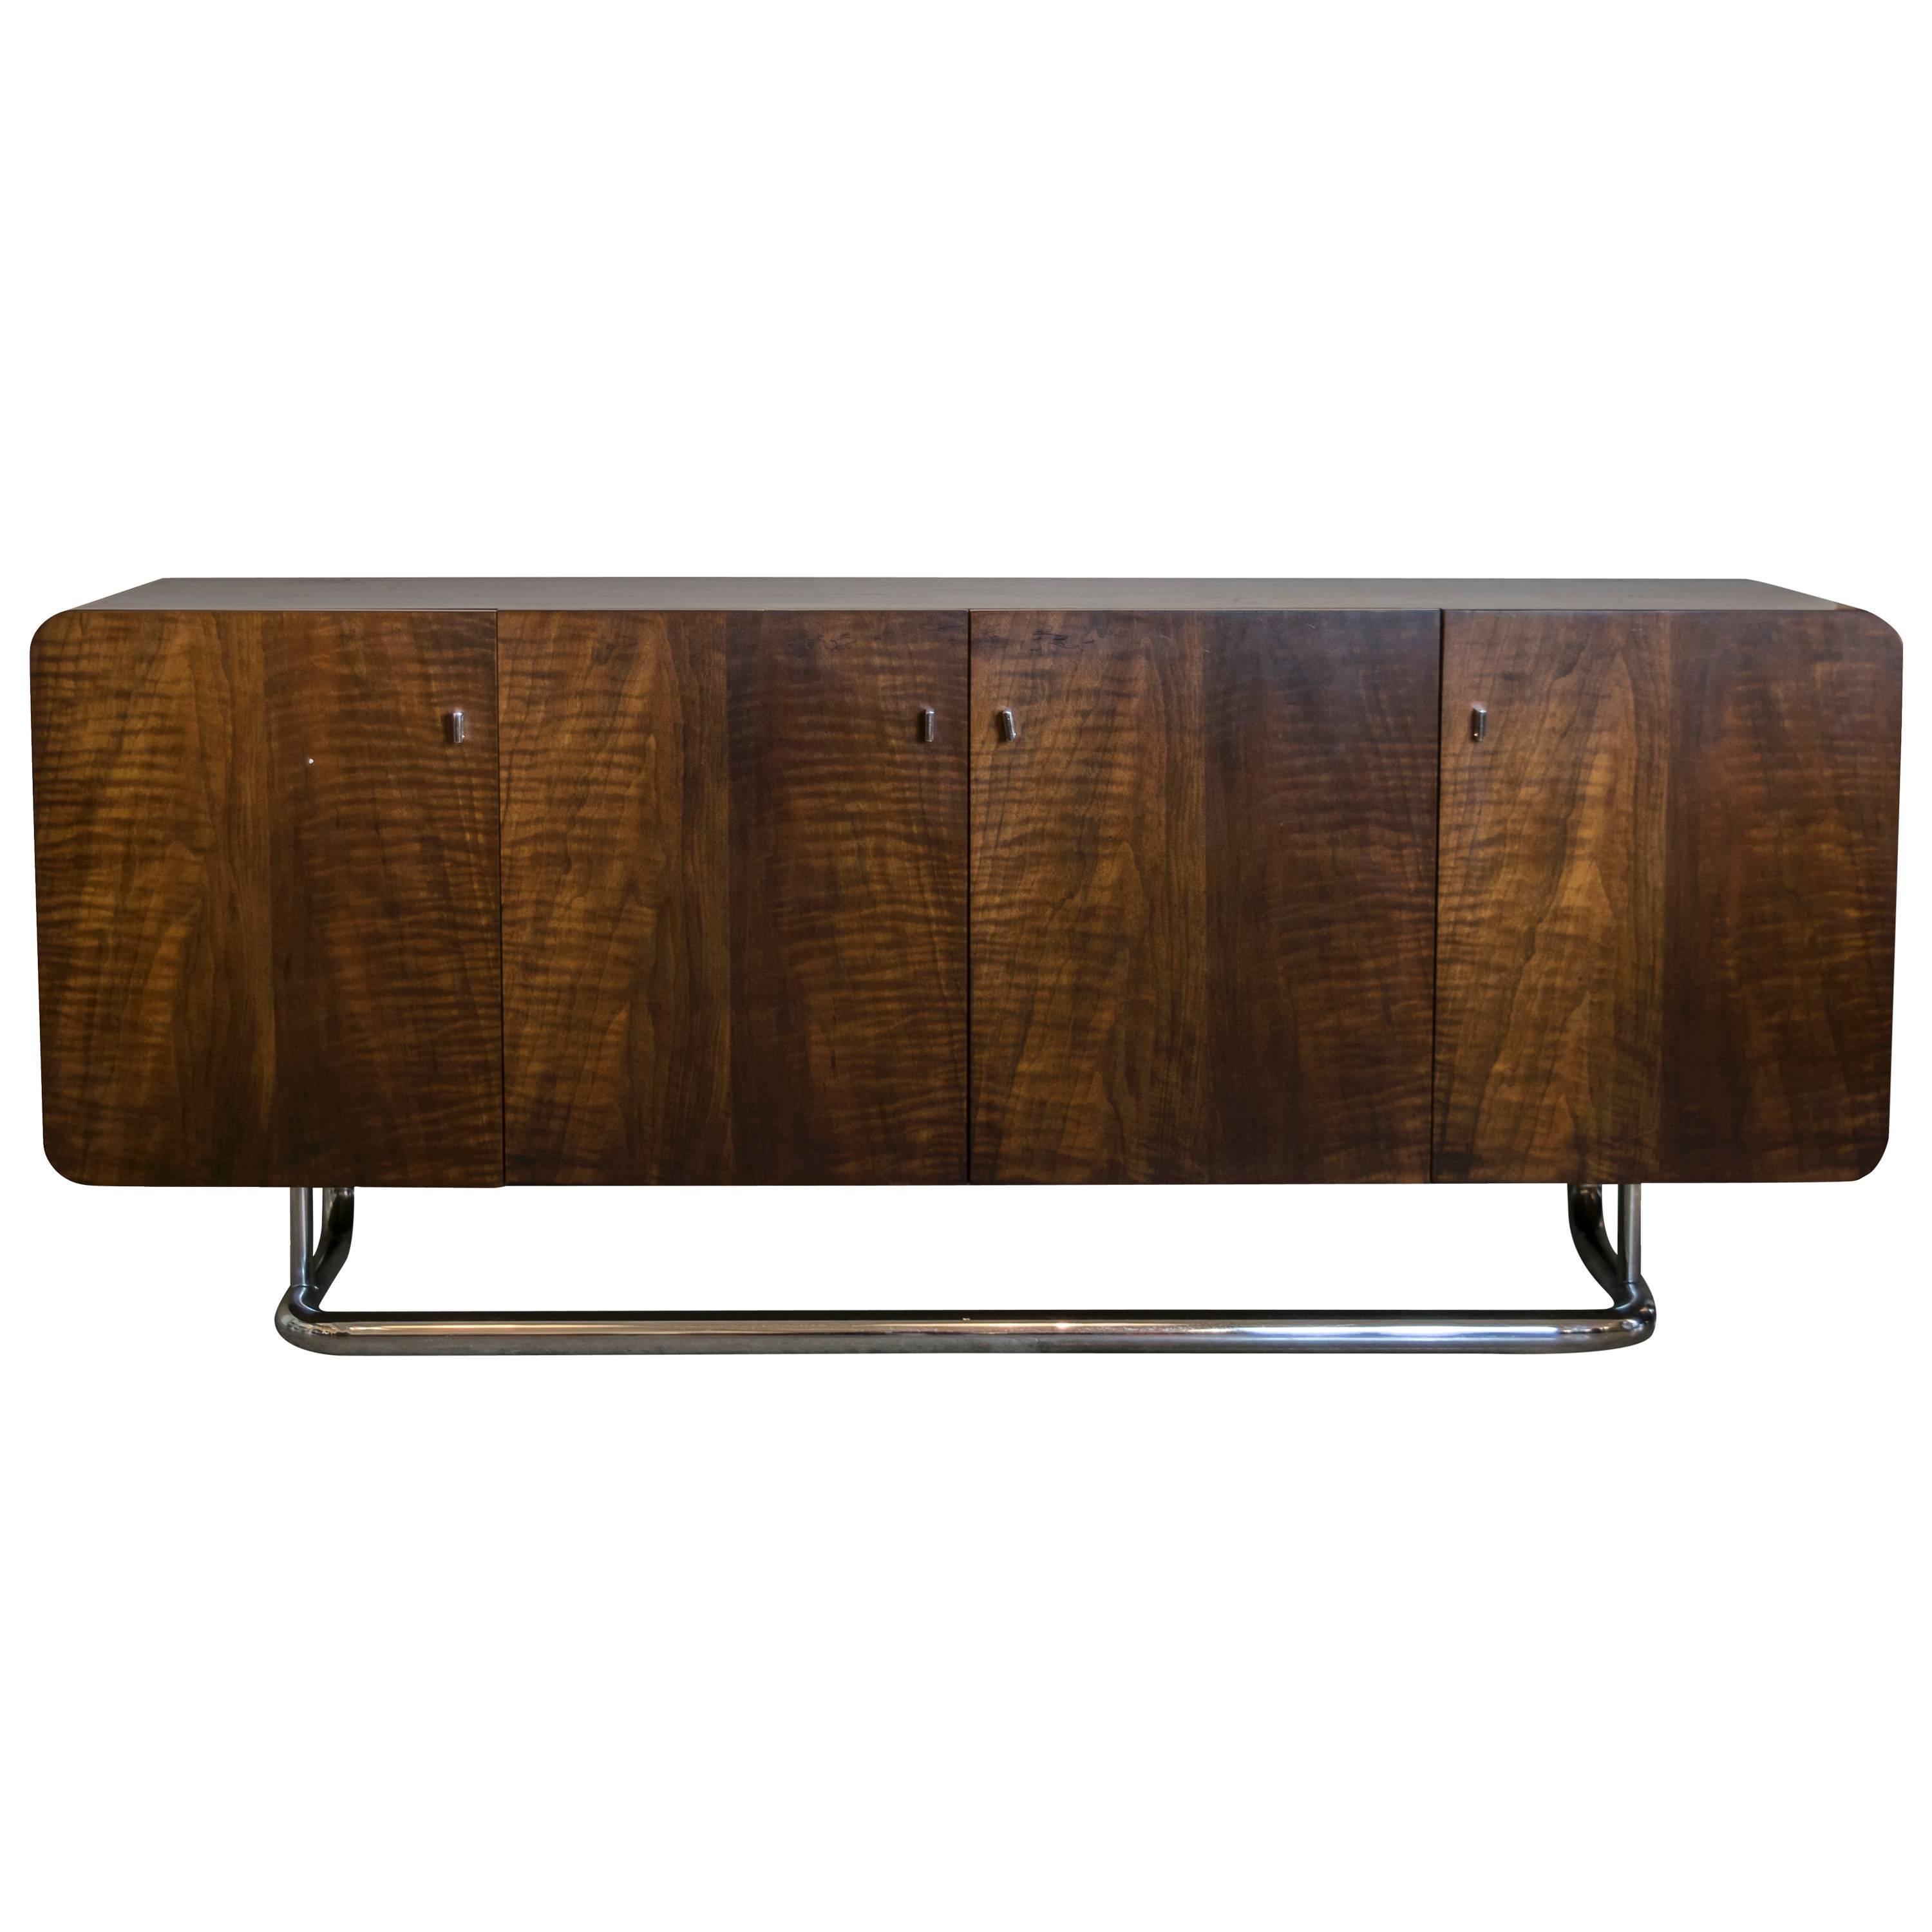 Rounded Walnut Credenza with Cantilevered Chrome Base